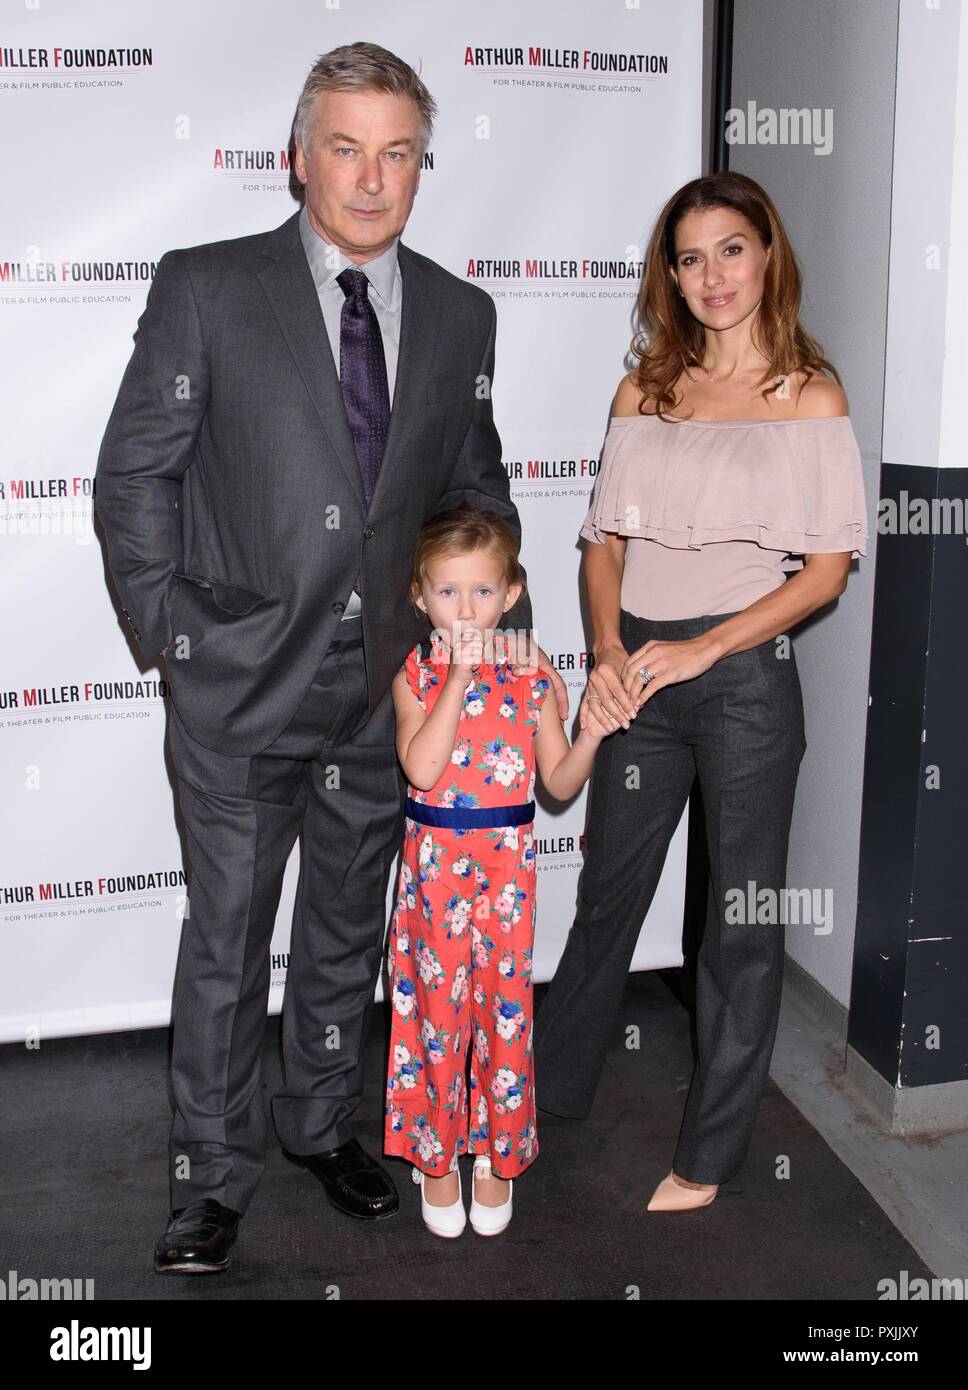 New York, NY, USA. 22nd Oct, 2018. Alec Baldwin, Hilaria Baldwin, Carmen Baldwin at arrivals for Arthur Miller Foundation Honors, City Winery, New York, NY October 22, 2018. Credit: RCF/Everett Collection/Alamy Live News Stock Photo